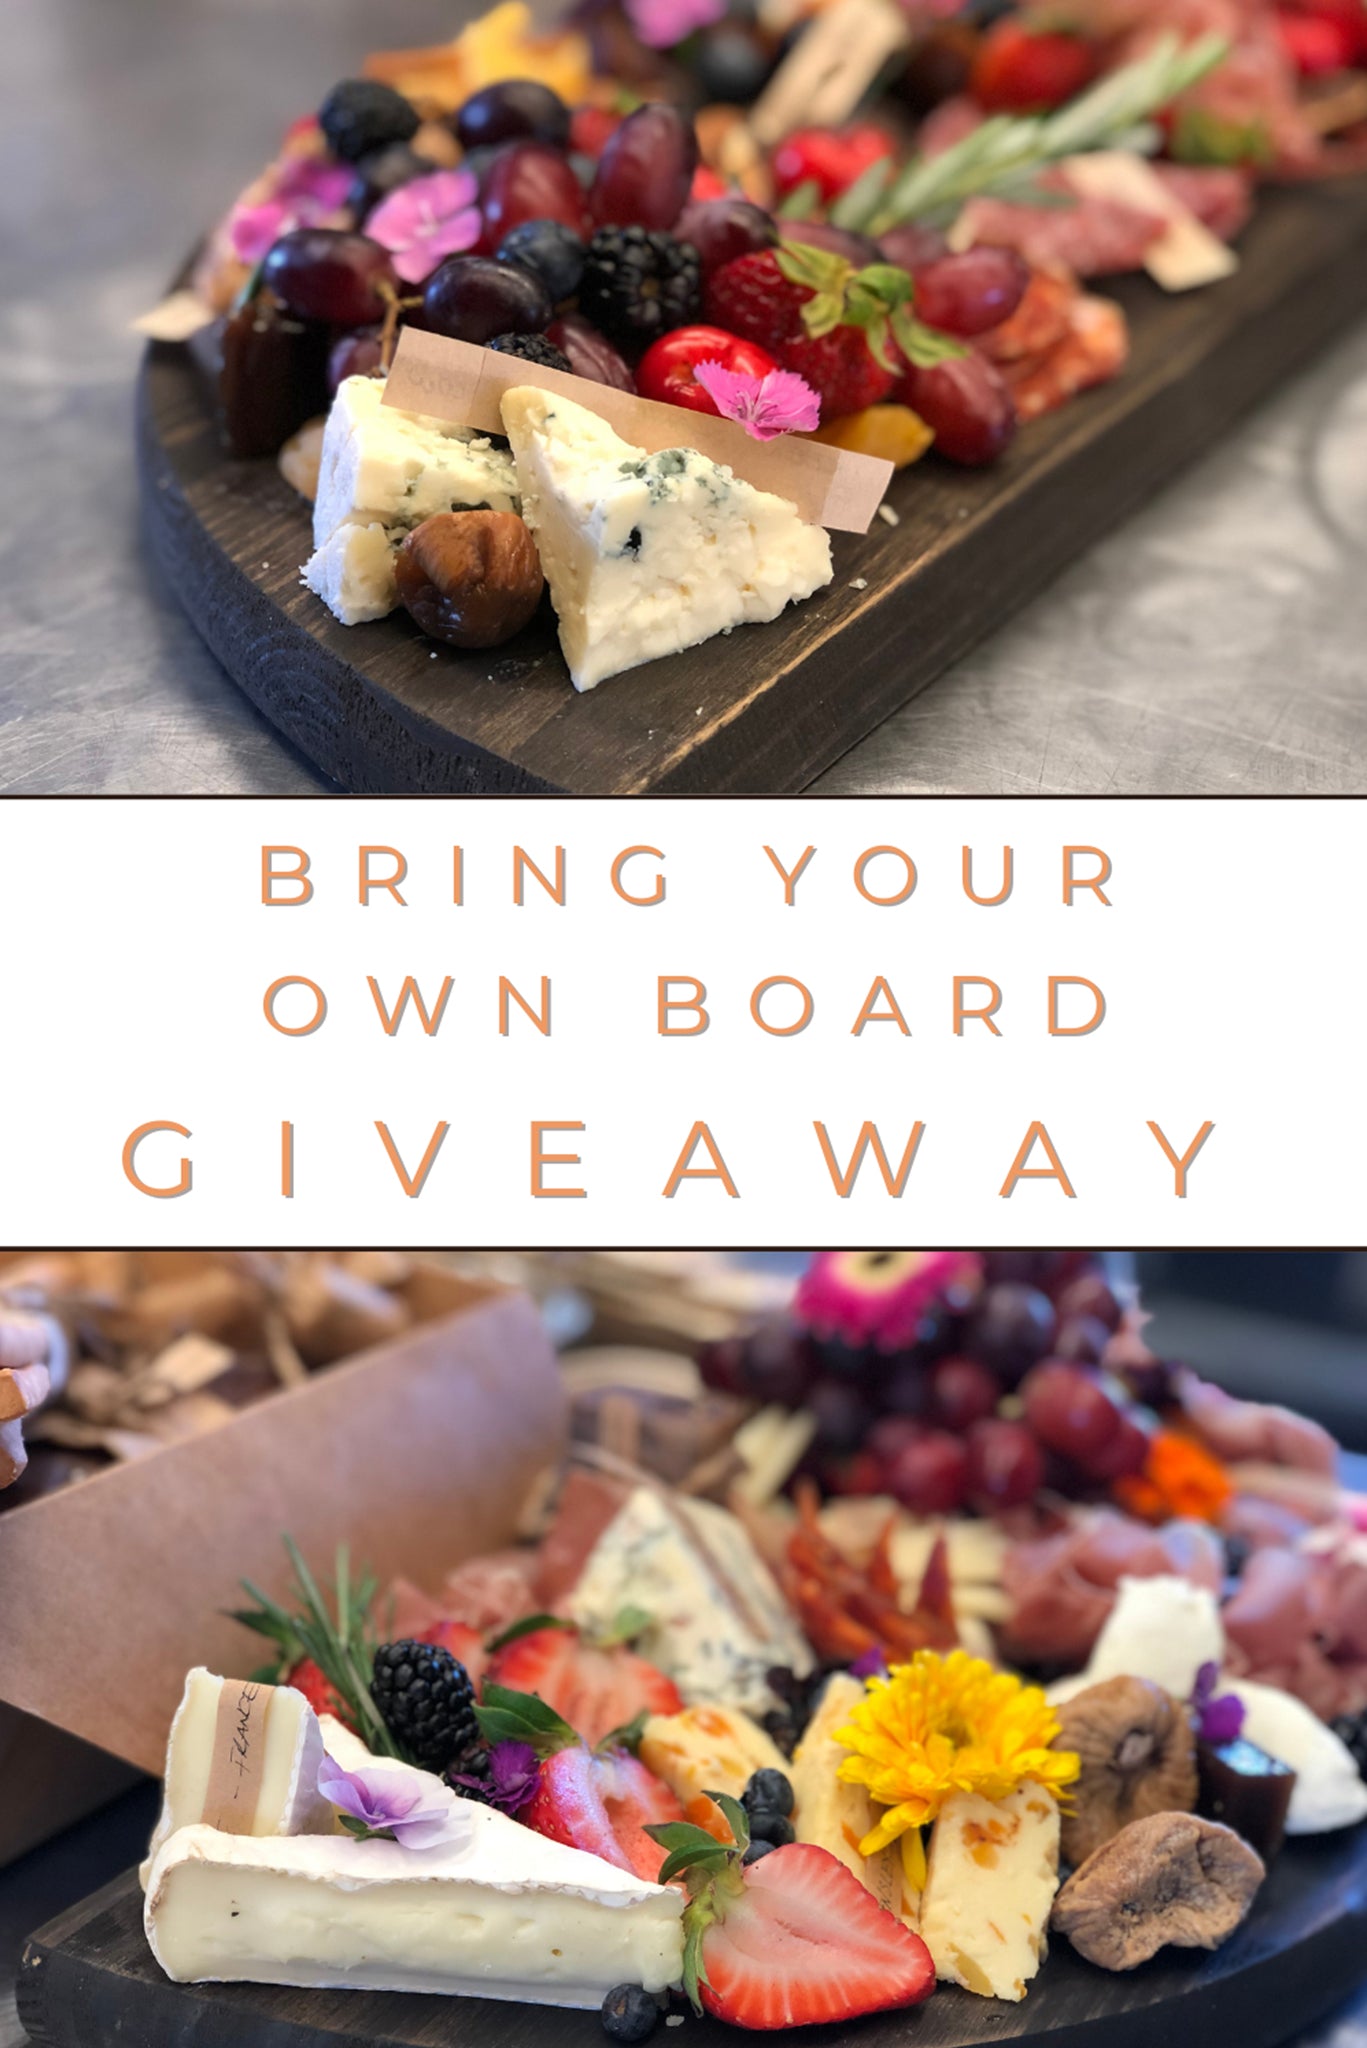 BYOB (Bring Your Own Board) GIVEAWAY - Pretty Collected